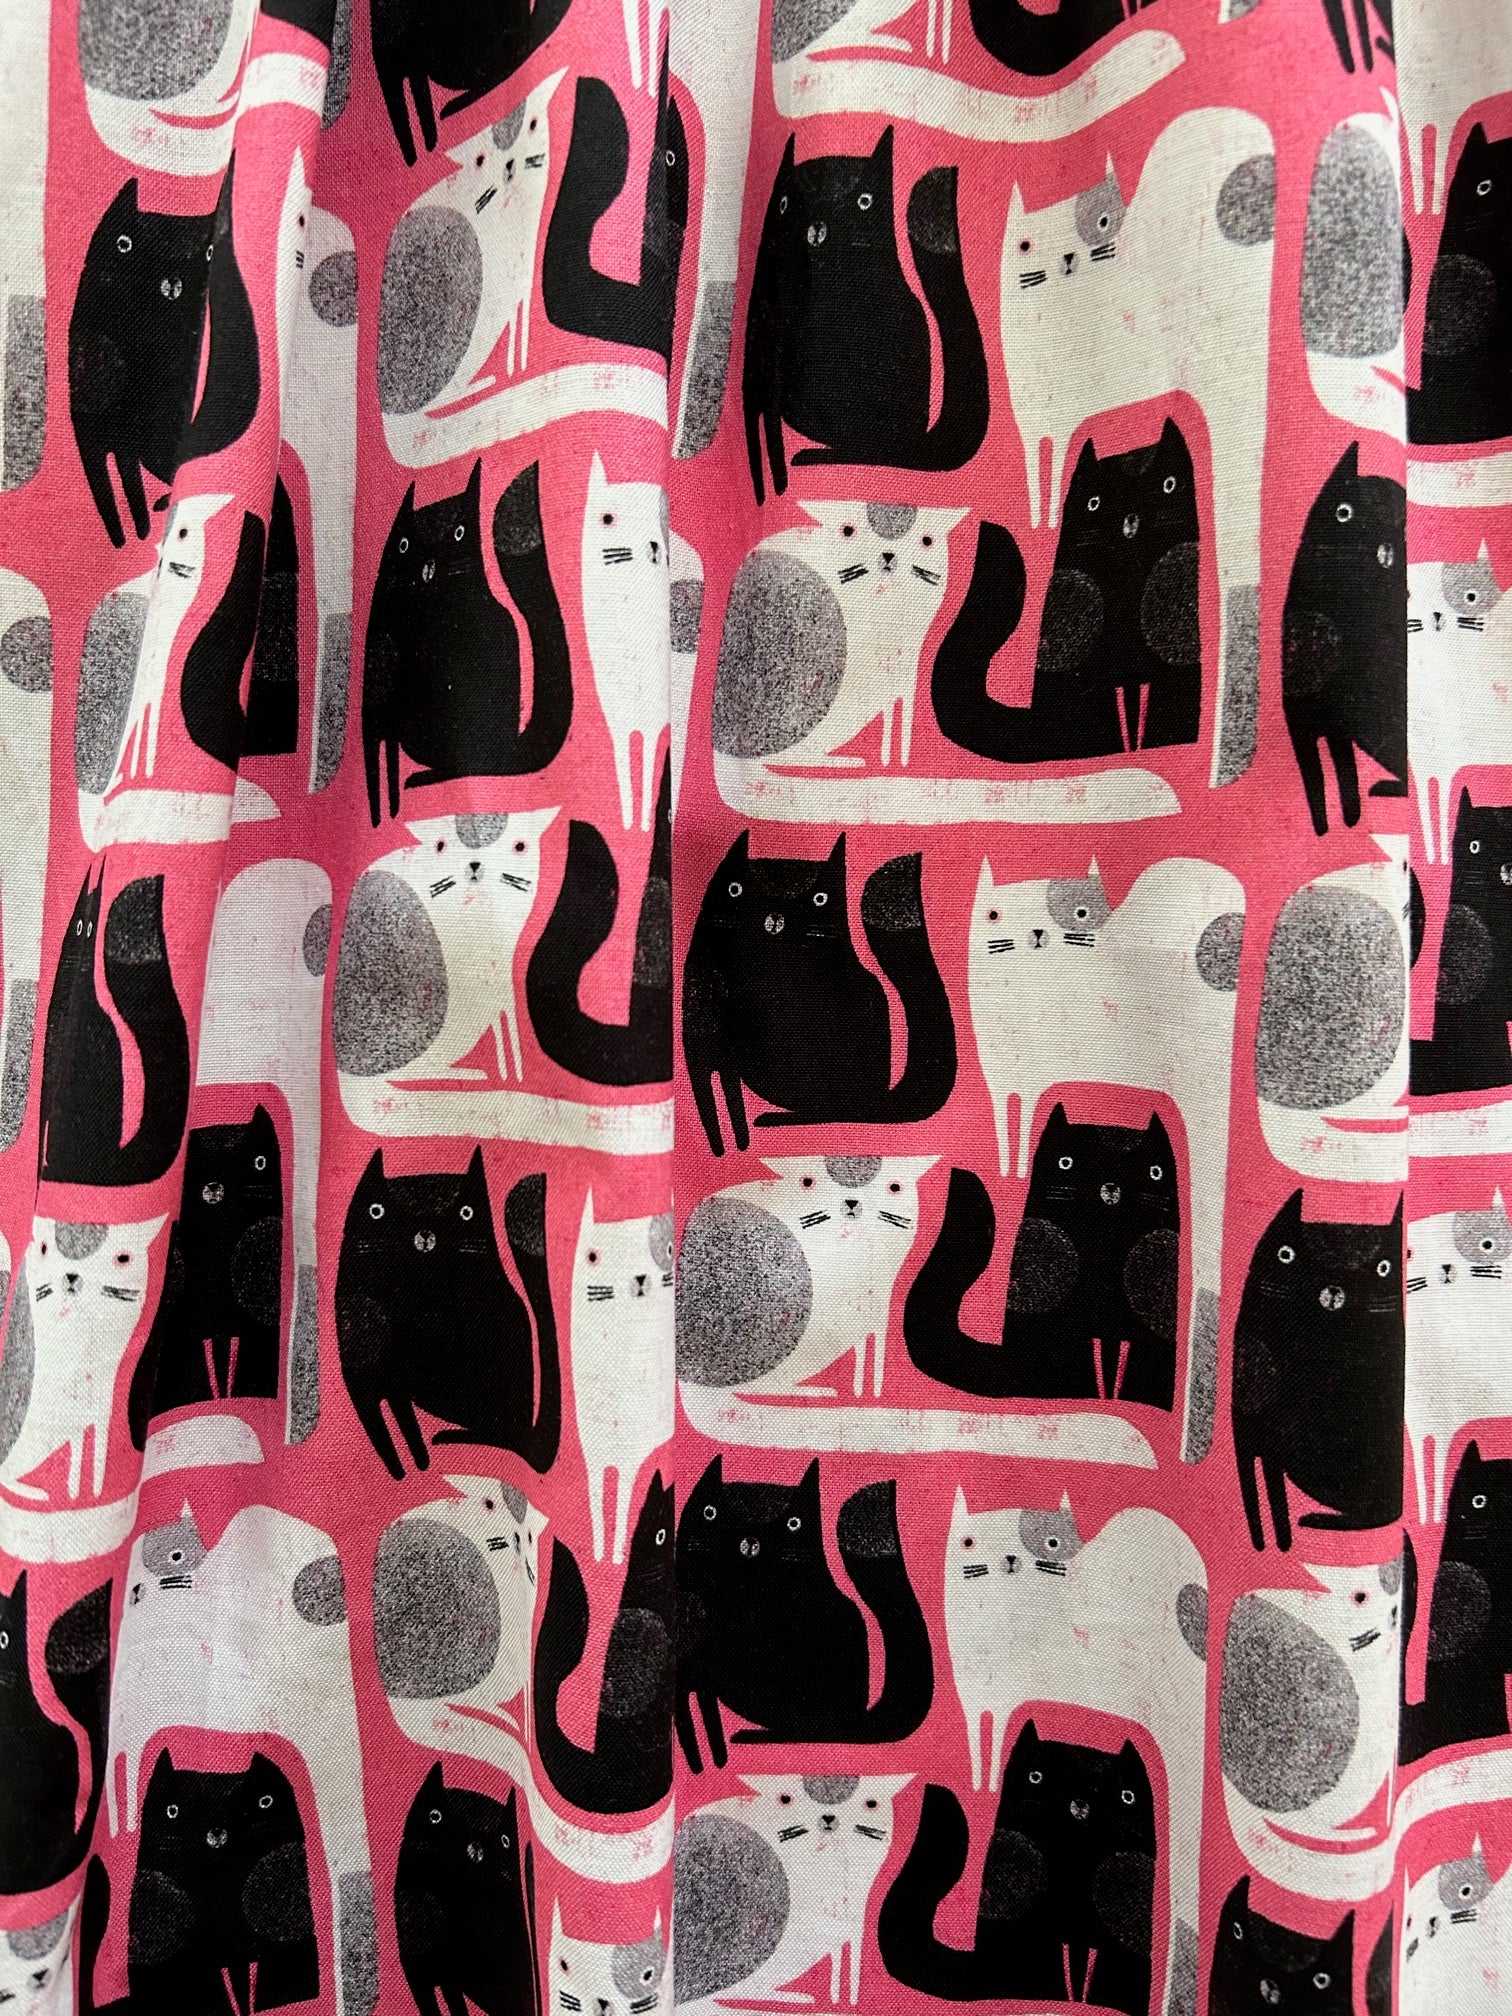 a close up of the fabric showing black and white cats on pink background